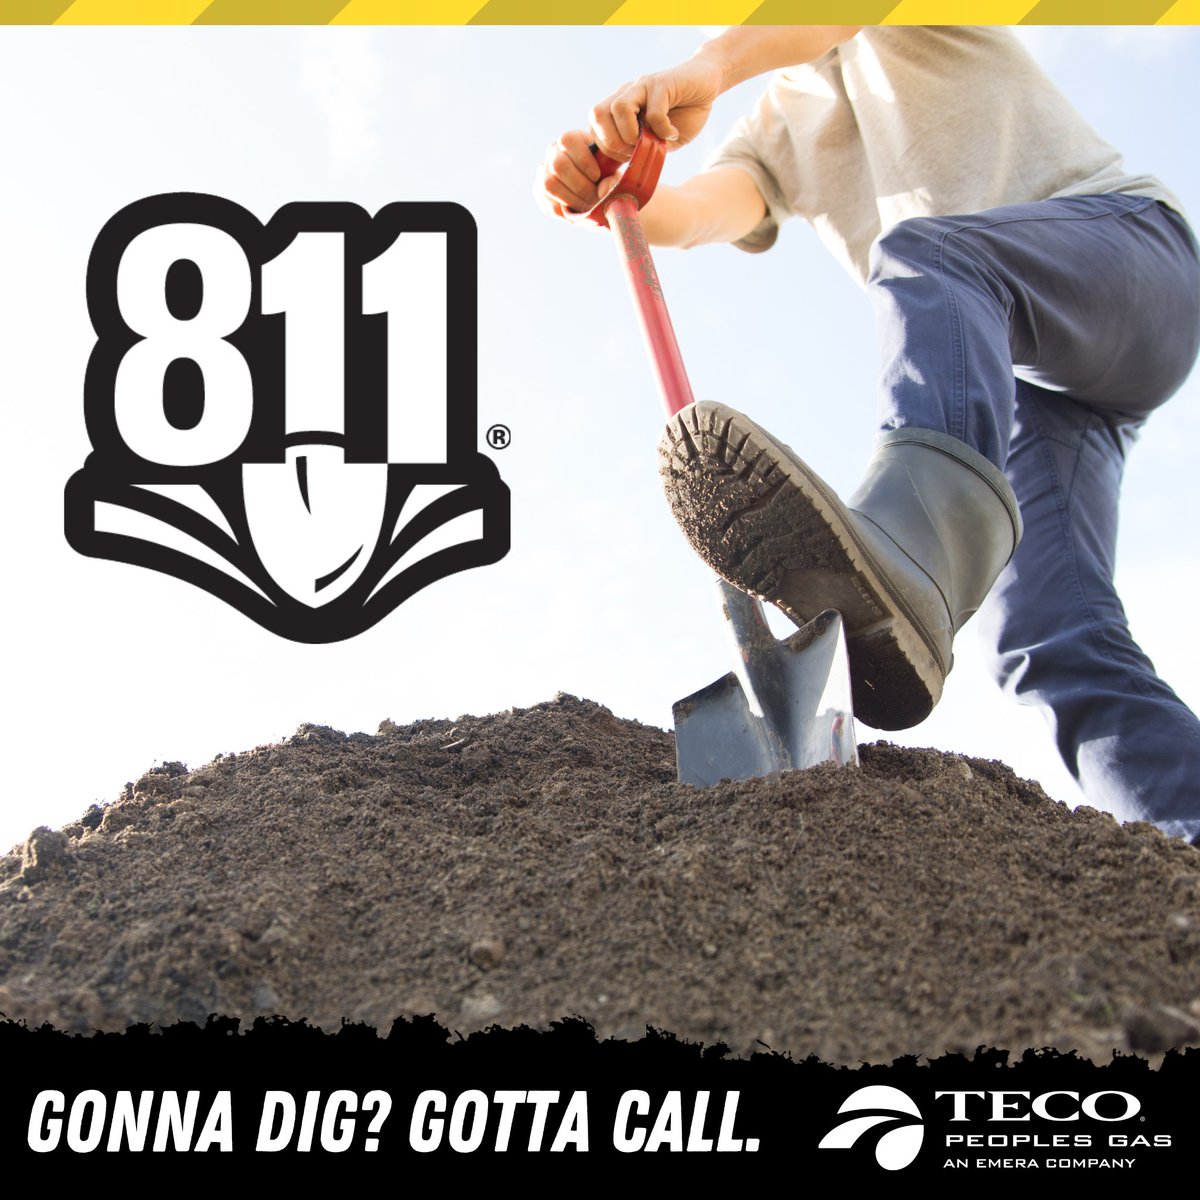 Call 811 before digging to have underground utility lines marked at the dig site. Here's the step-by-step process for how it works. sunshine811.com/6-steps-to-saf… #NSDM